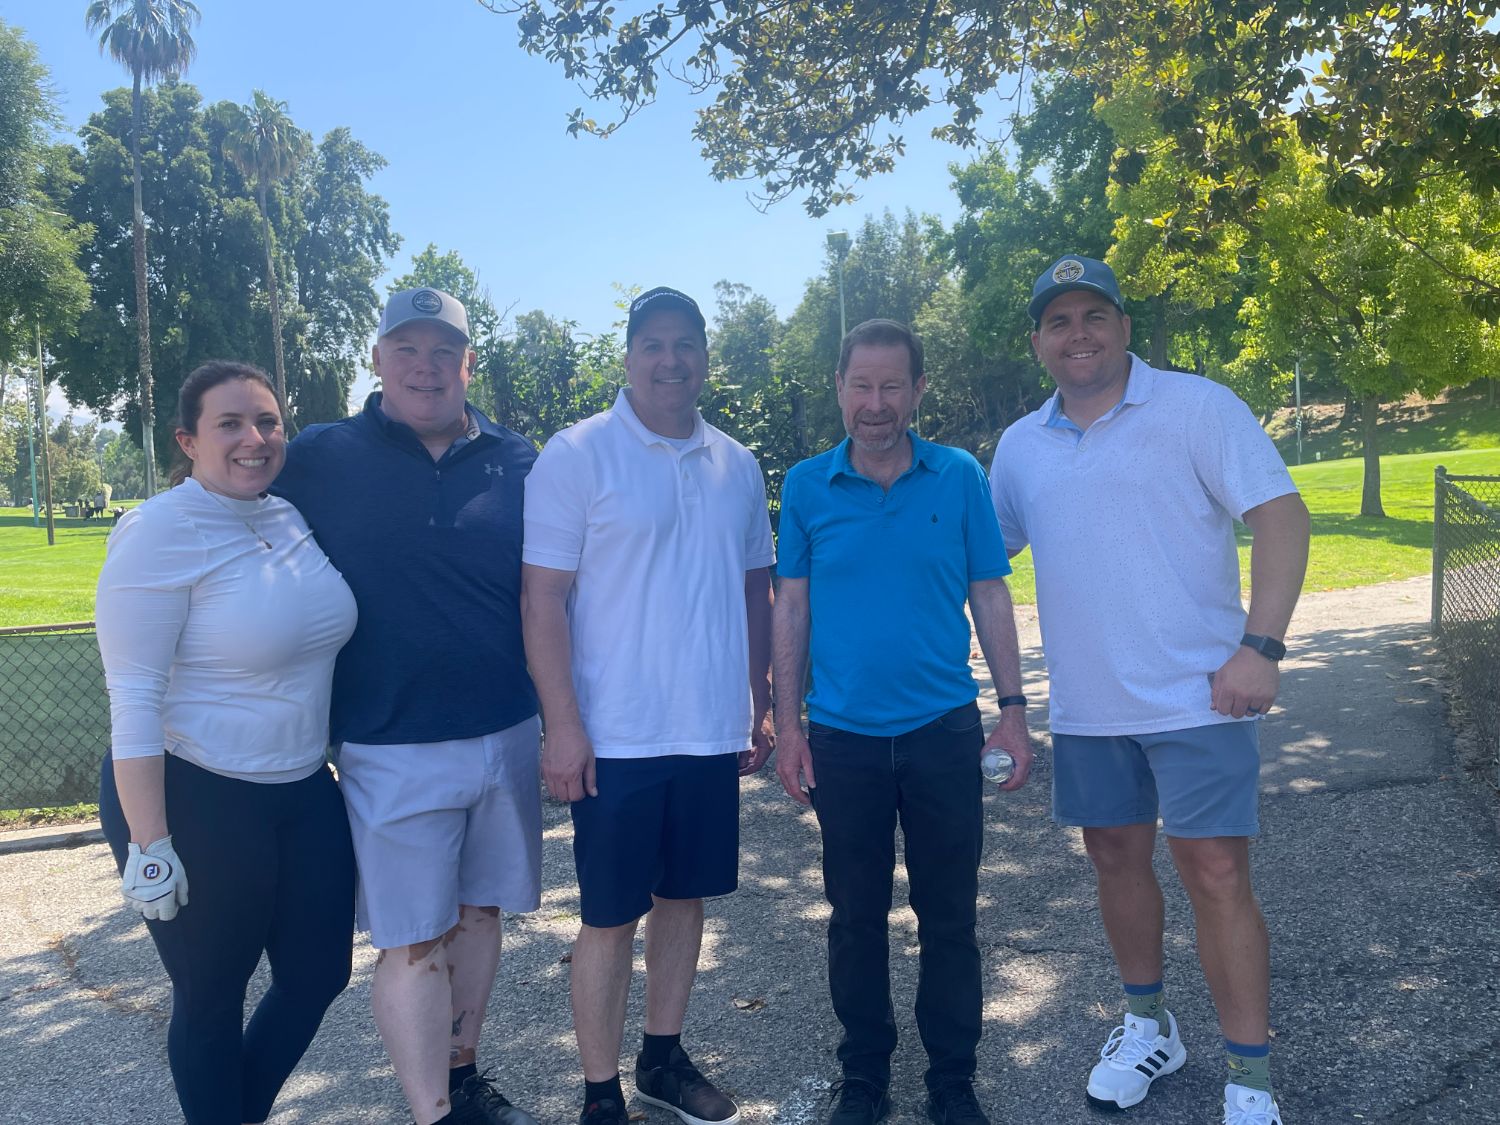 PHOTO: Sally Kilby | The South Pasadenan | Mayor Jon Primuth (second from right) poses for a photo with South Pasadena Police Department golf team members (L-R) Allison Wehrle, management analyst; Bob Bartl, sergeant, retired; Brian Solinsky, chief; and Tyler Borrello, corporal.